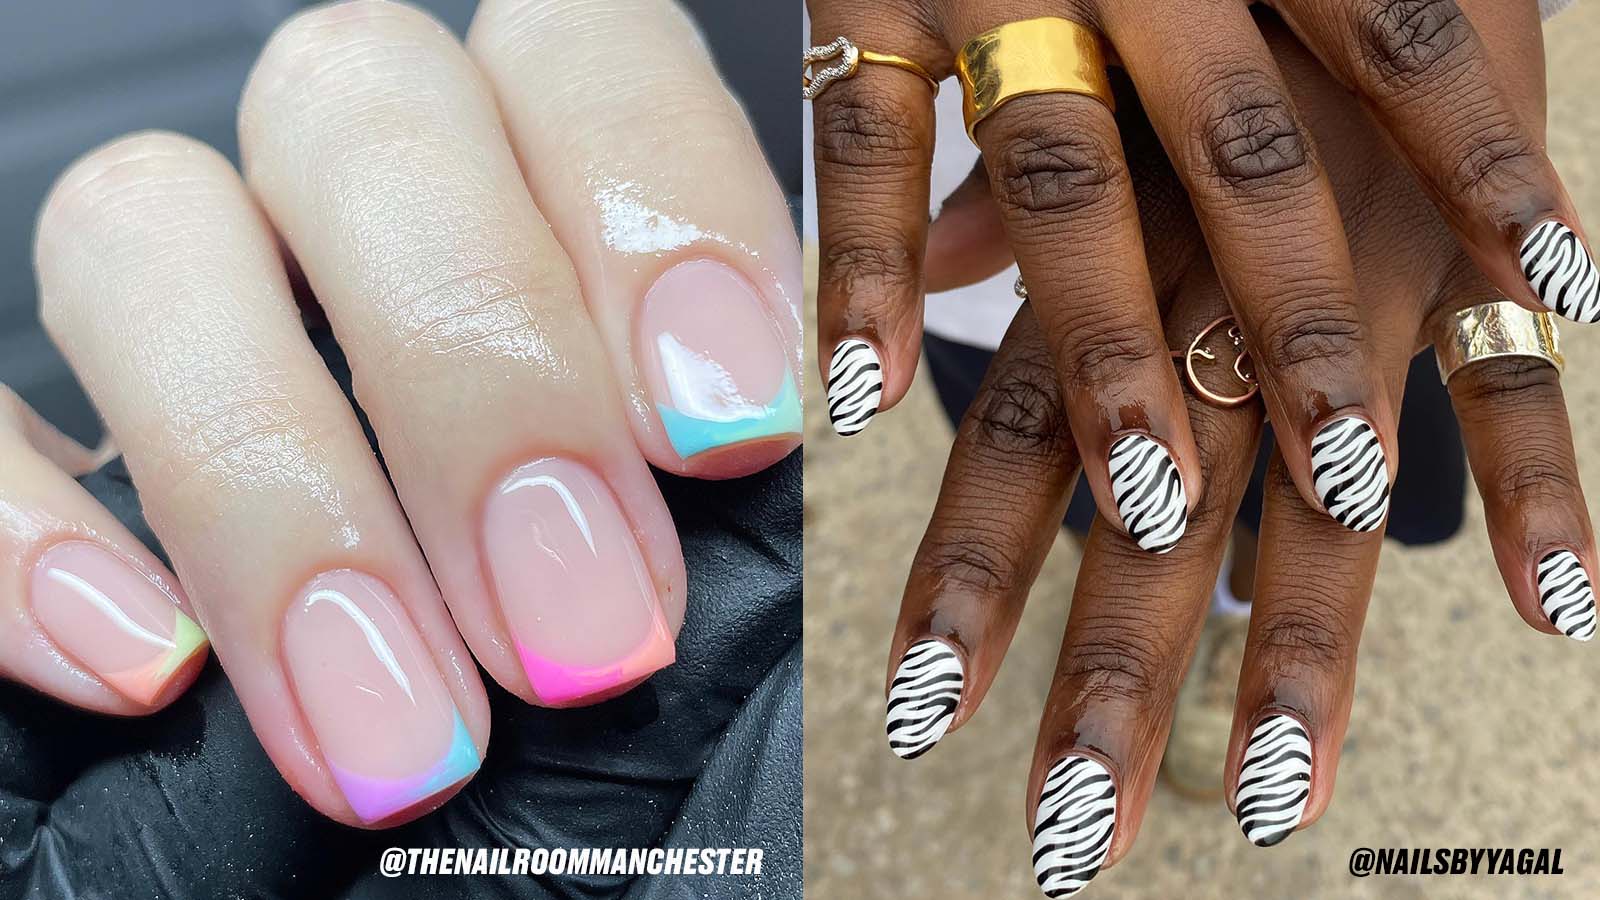 Black Nail Artists on the Importance of Representation in the Beauty Industry - wide 2